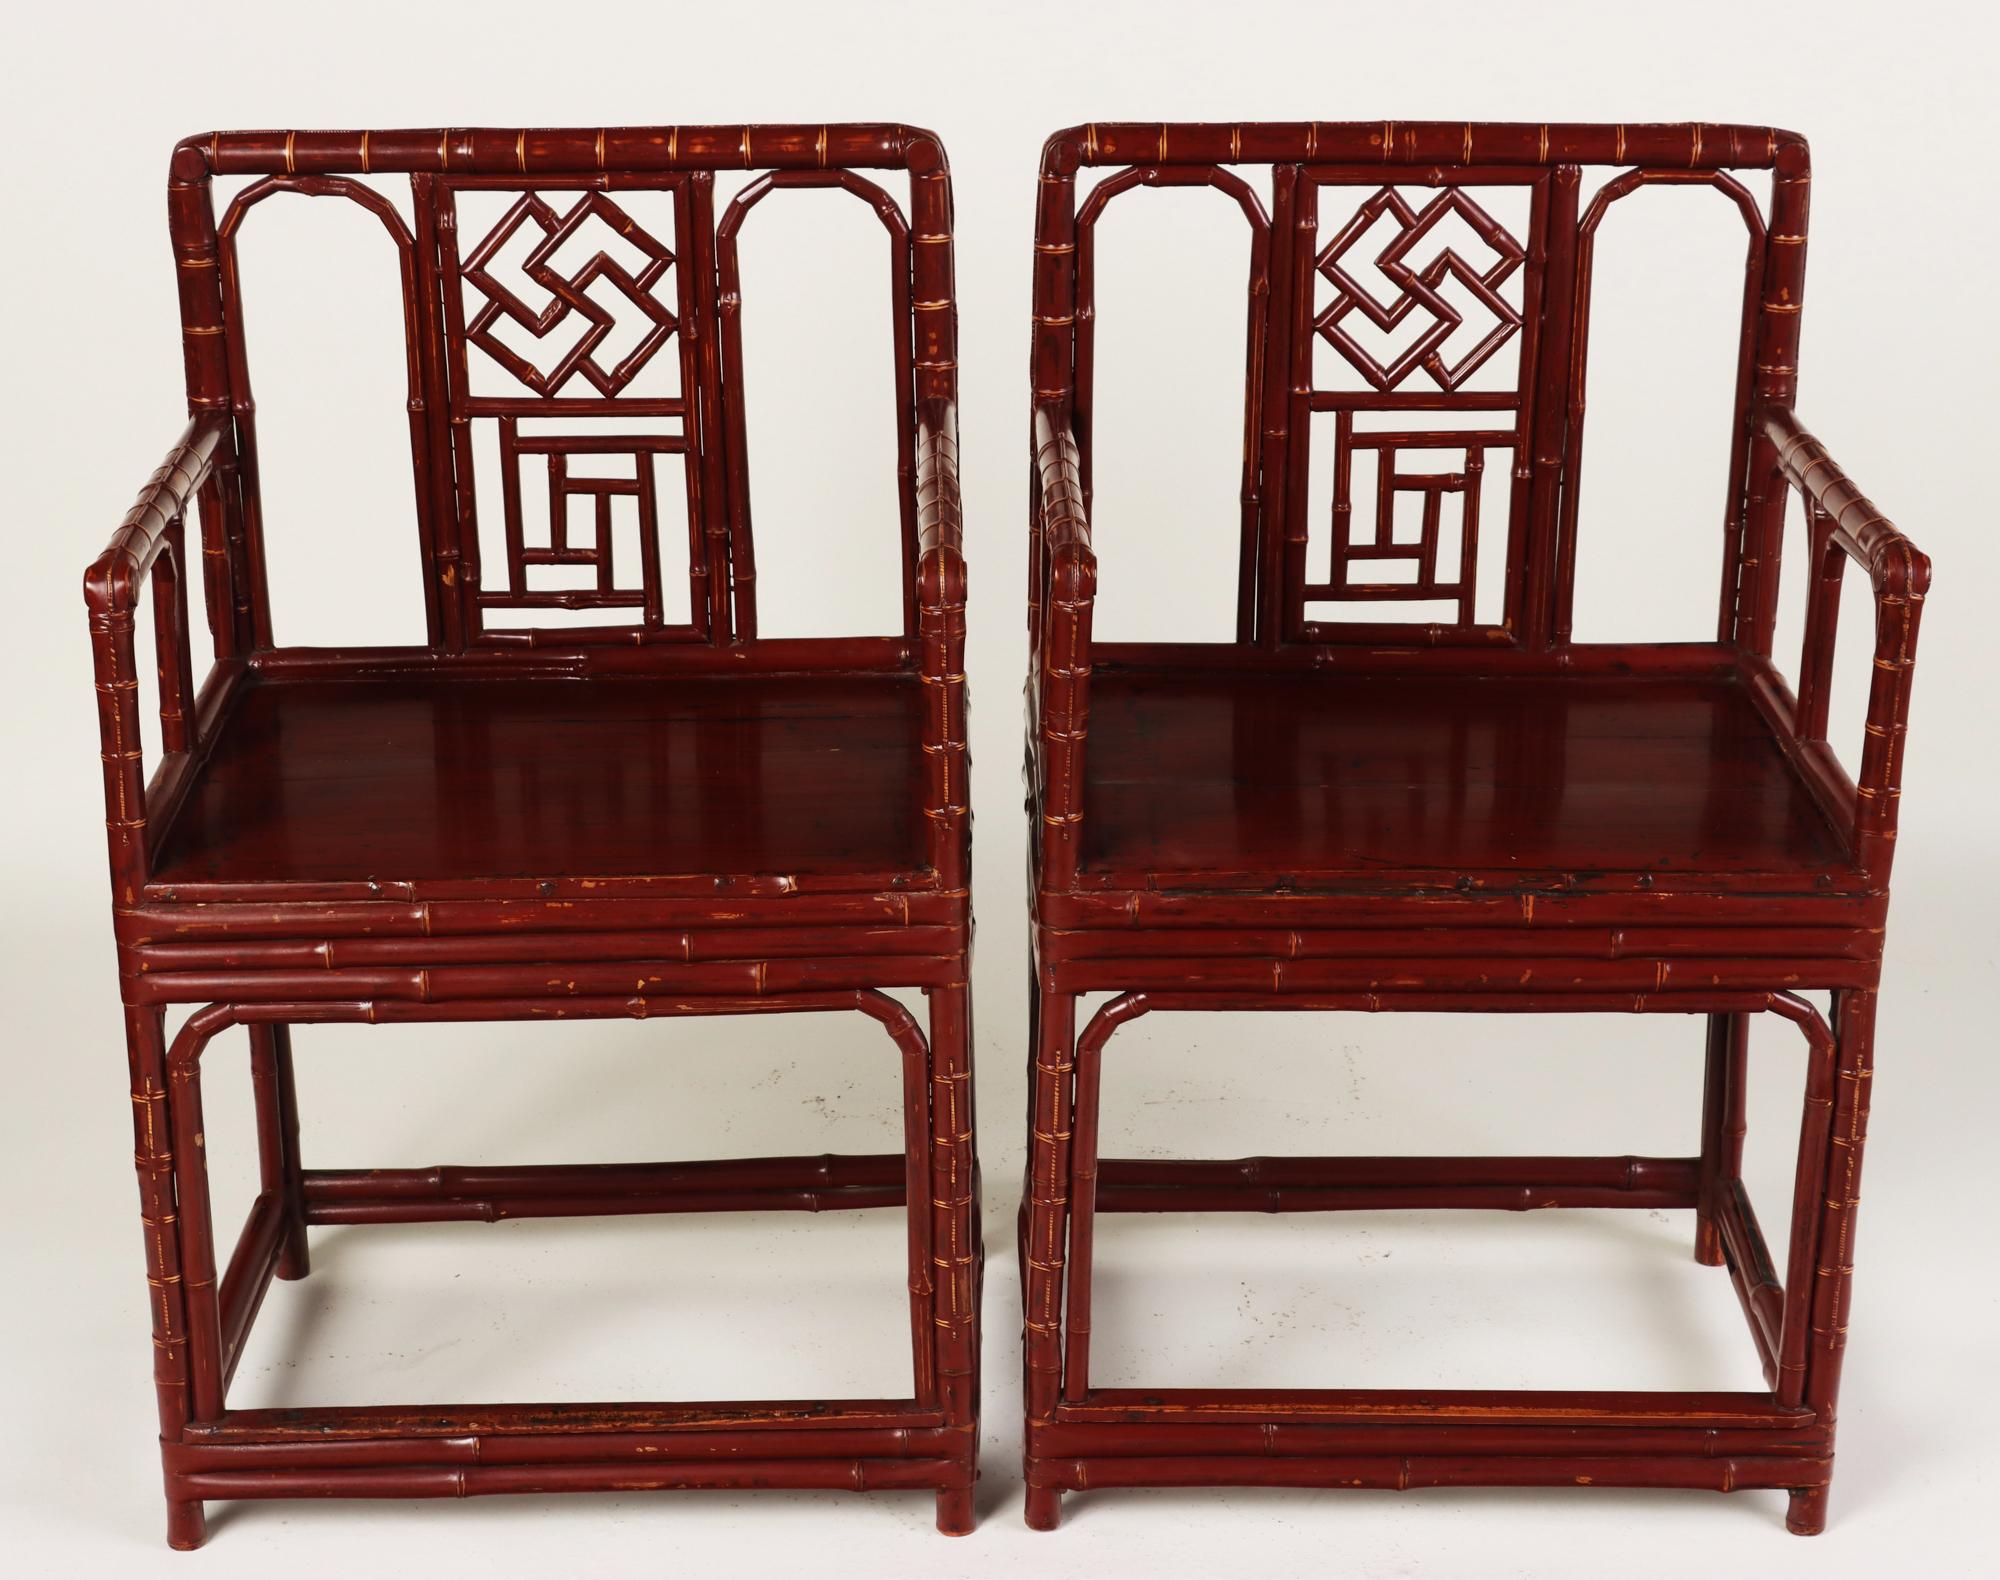 A beautiful pair of early 20th C Chinese Brighton pavilion style bamboo armchairs in fantastic condition.